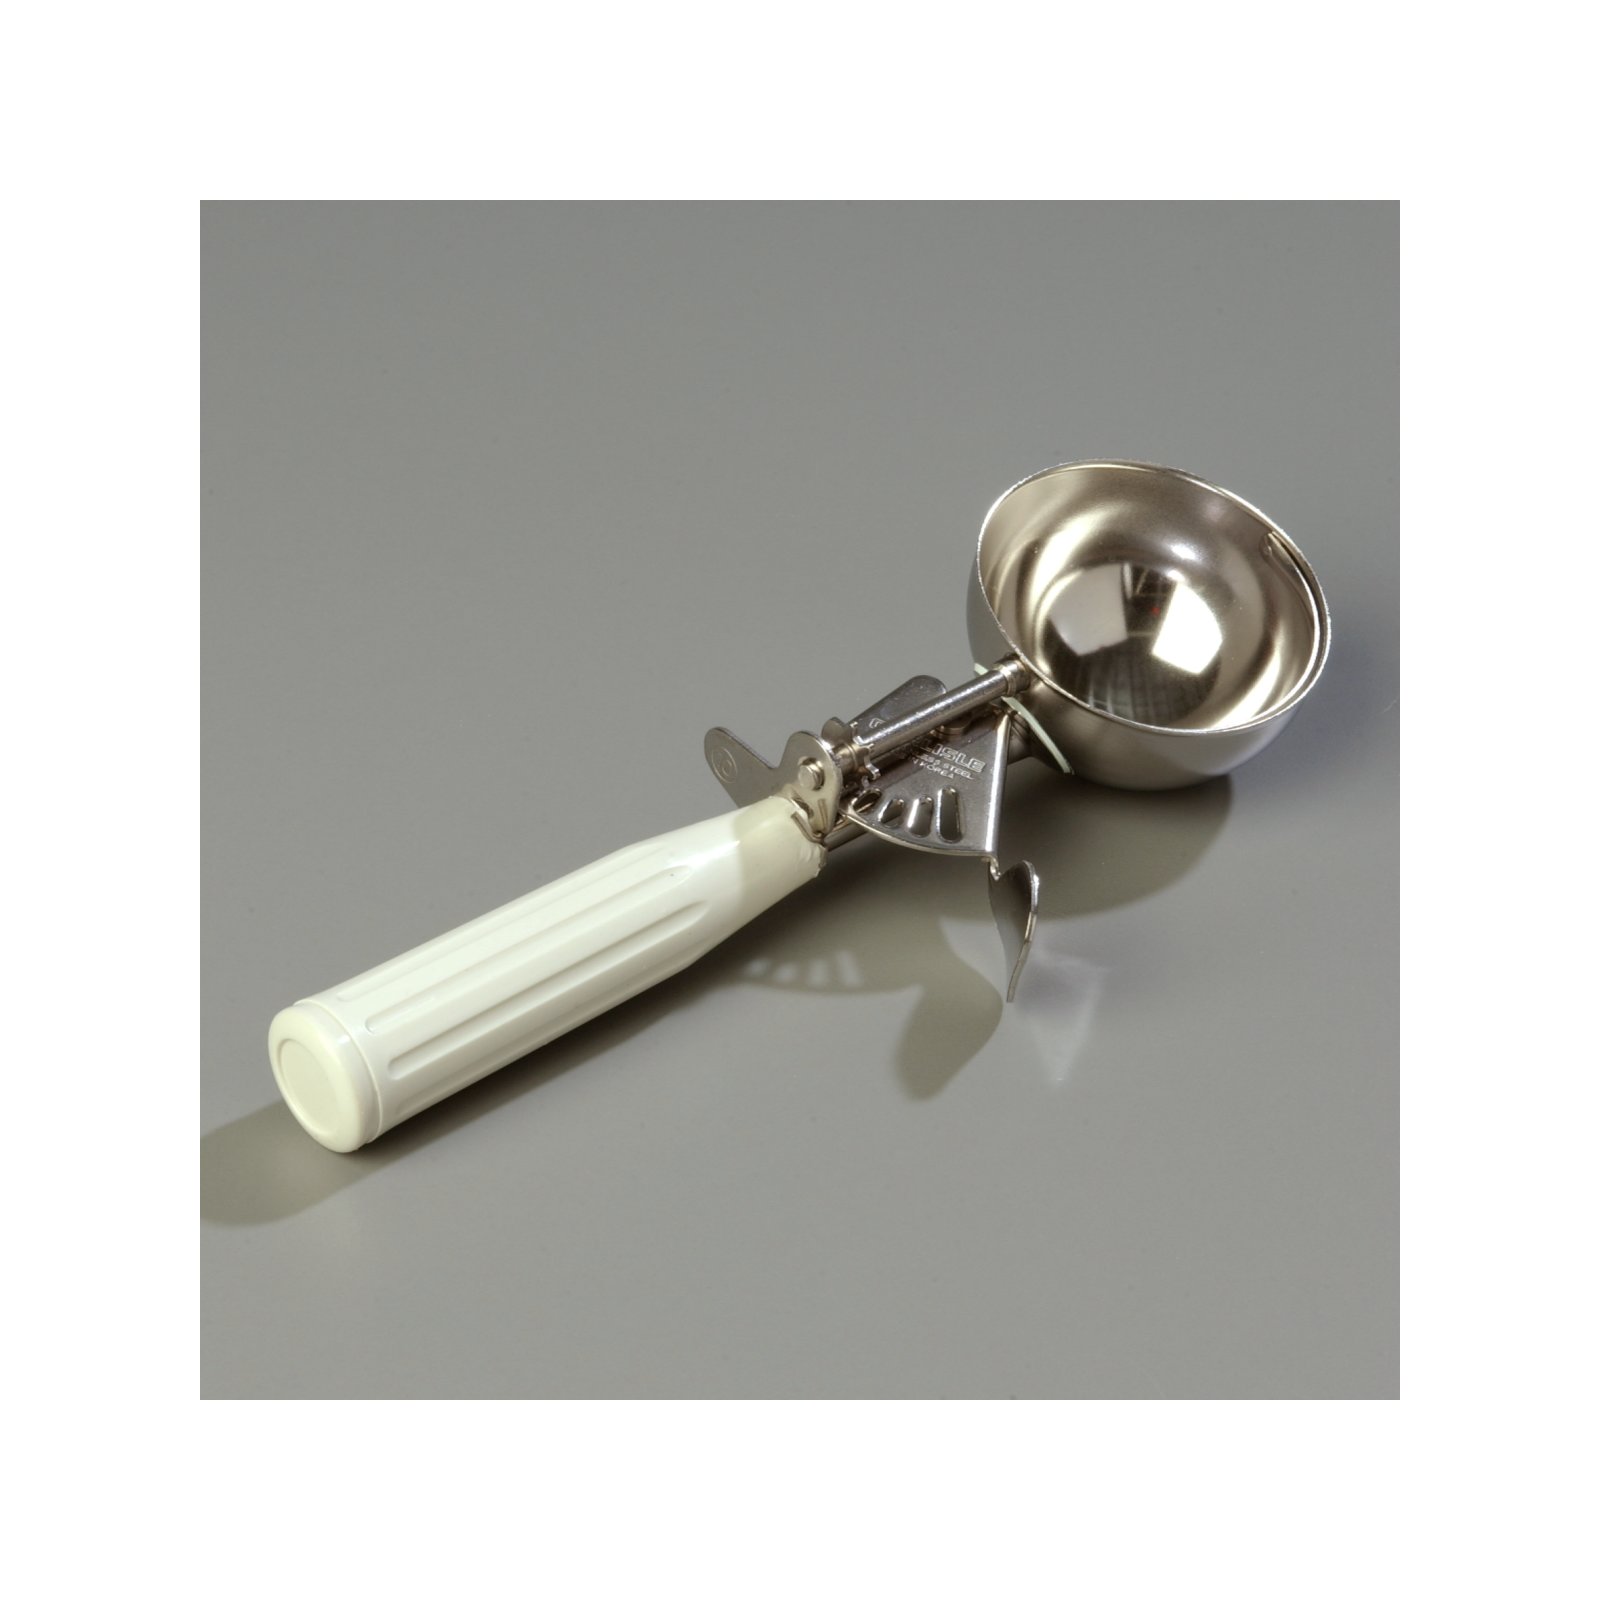 Special Offer 47141 Disher #10  3.25 oz, 3/8 cup Ivory Food Portion Scoop